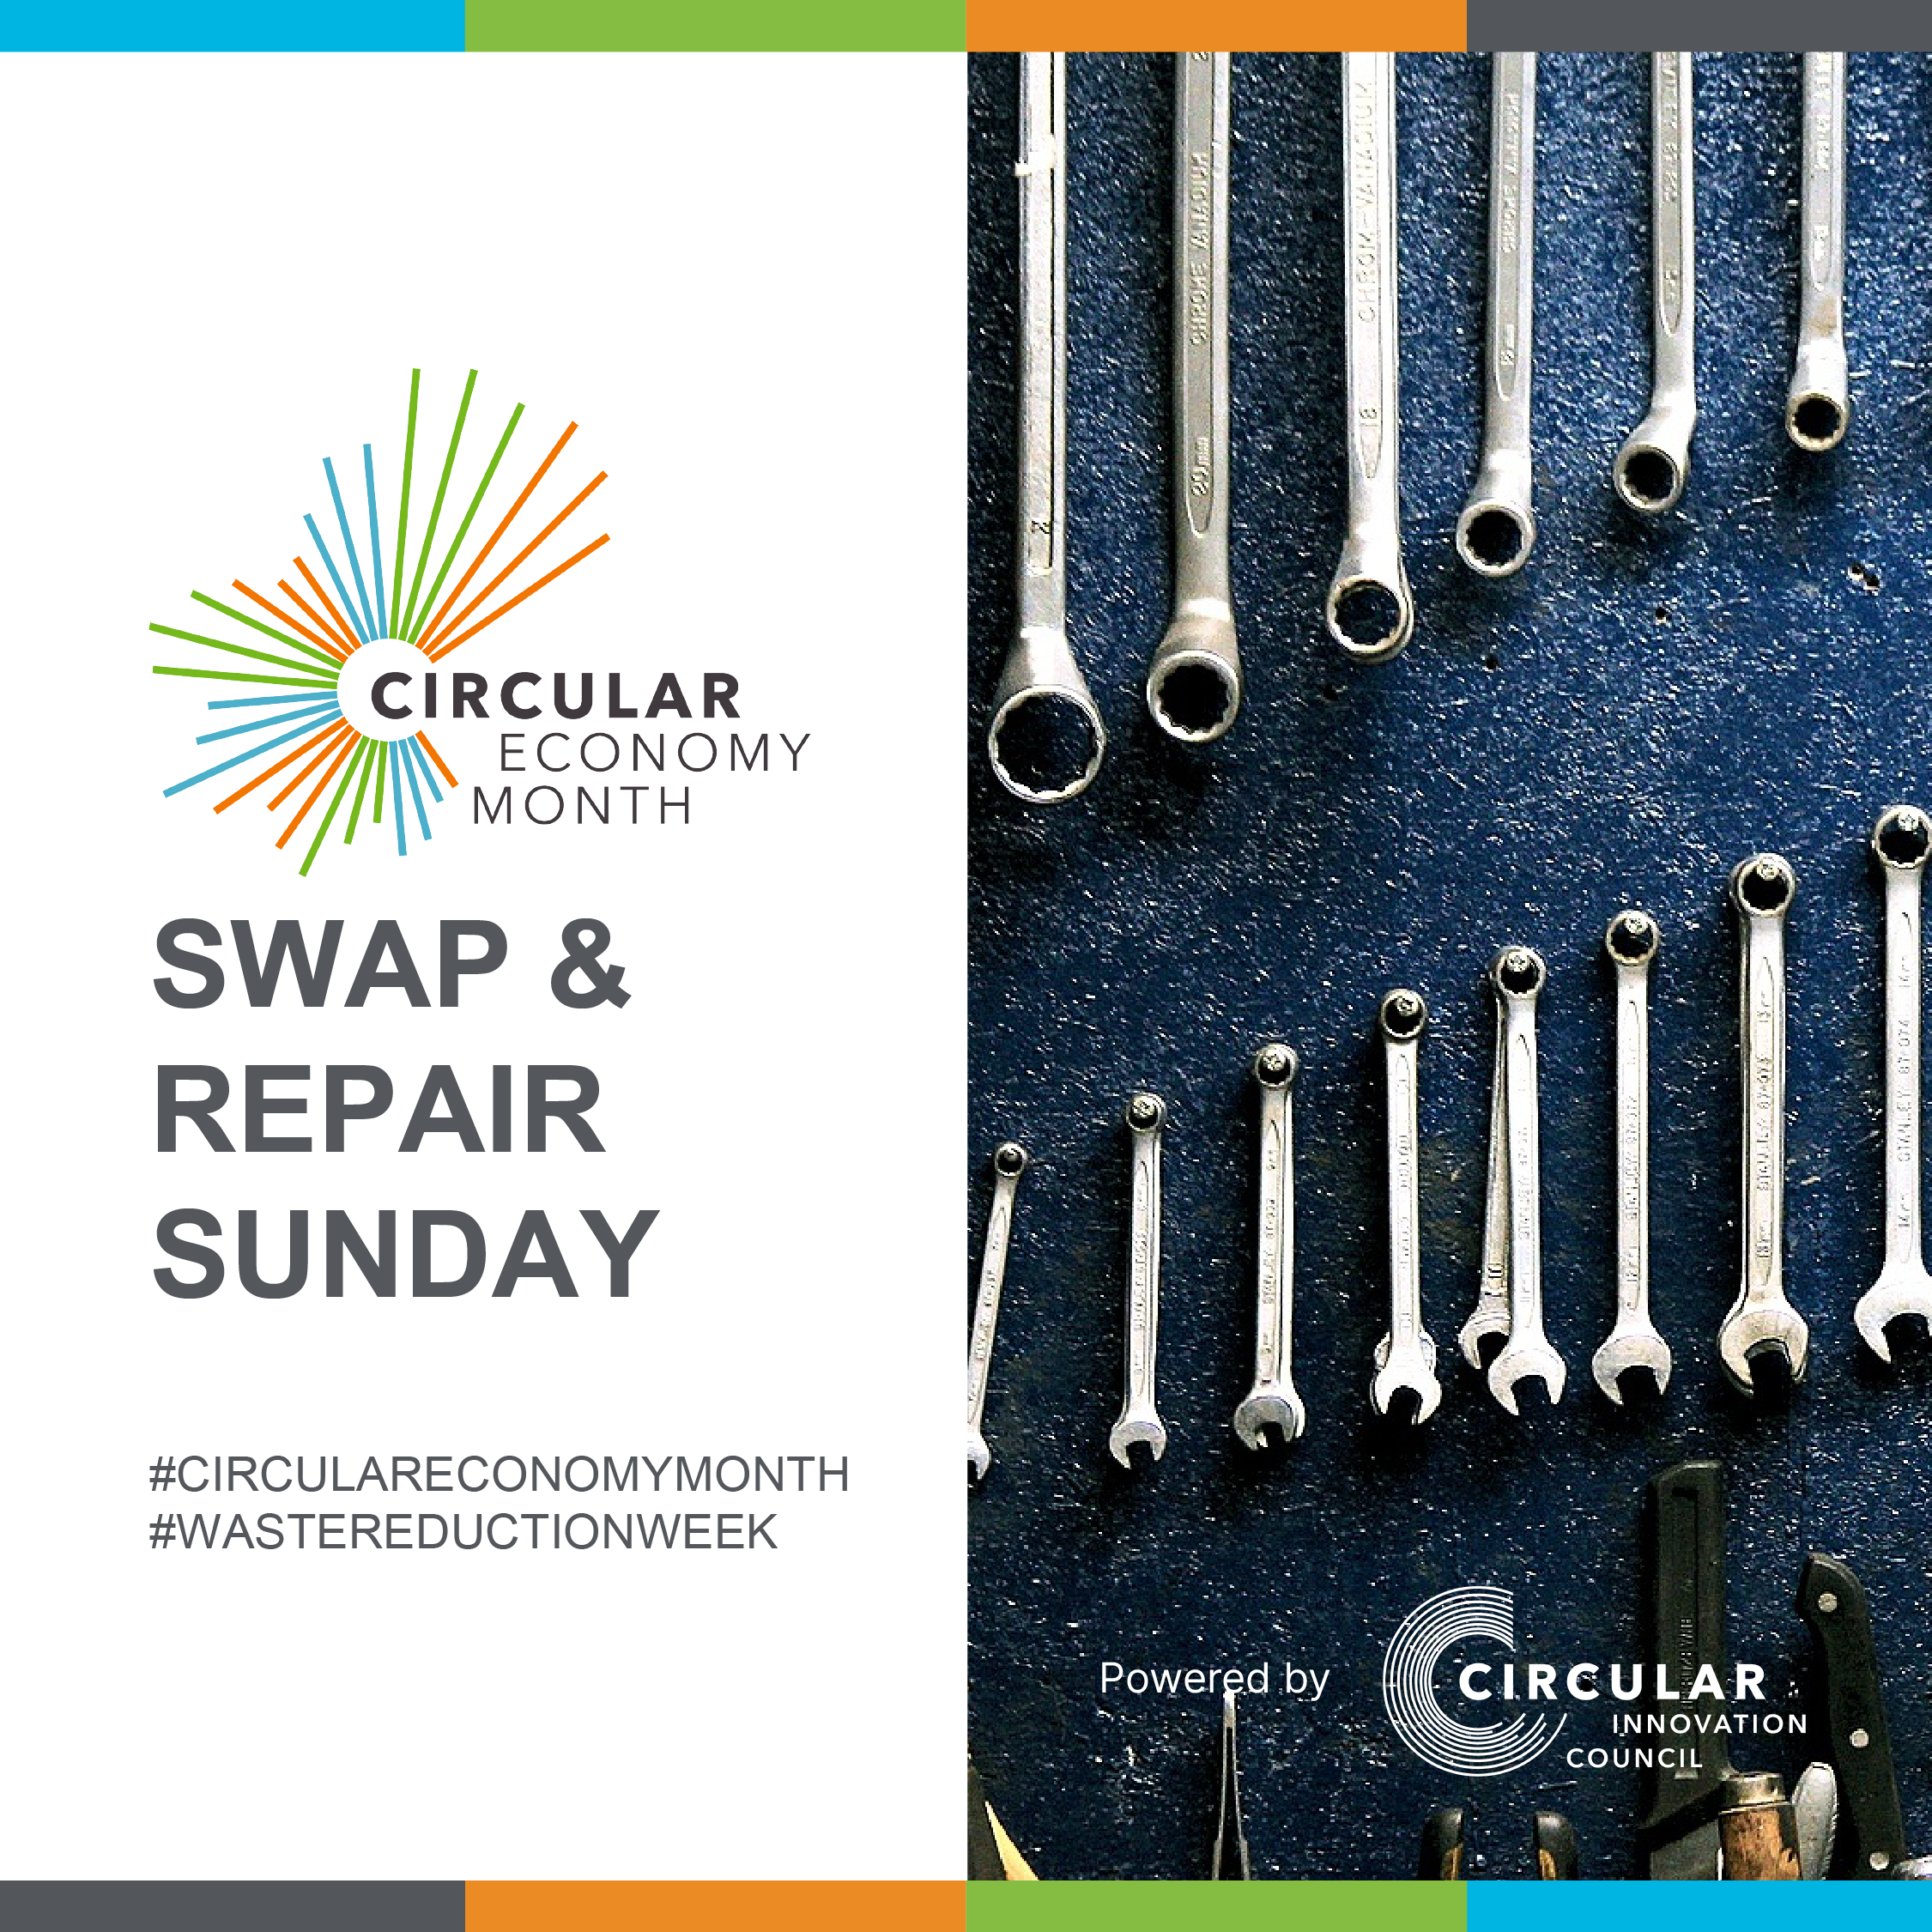 A series of varying-sized metal tools hang on a blue wall. Swap and Repair Sunday. Circular Economy Month, powered by Circular Innovation Council. #CircularEconomyMonth #WasteReductionWeek.